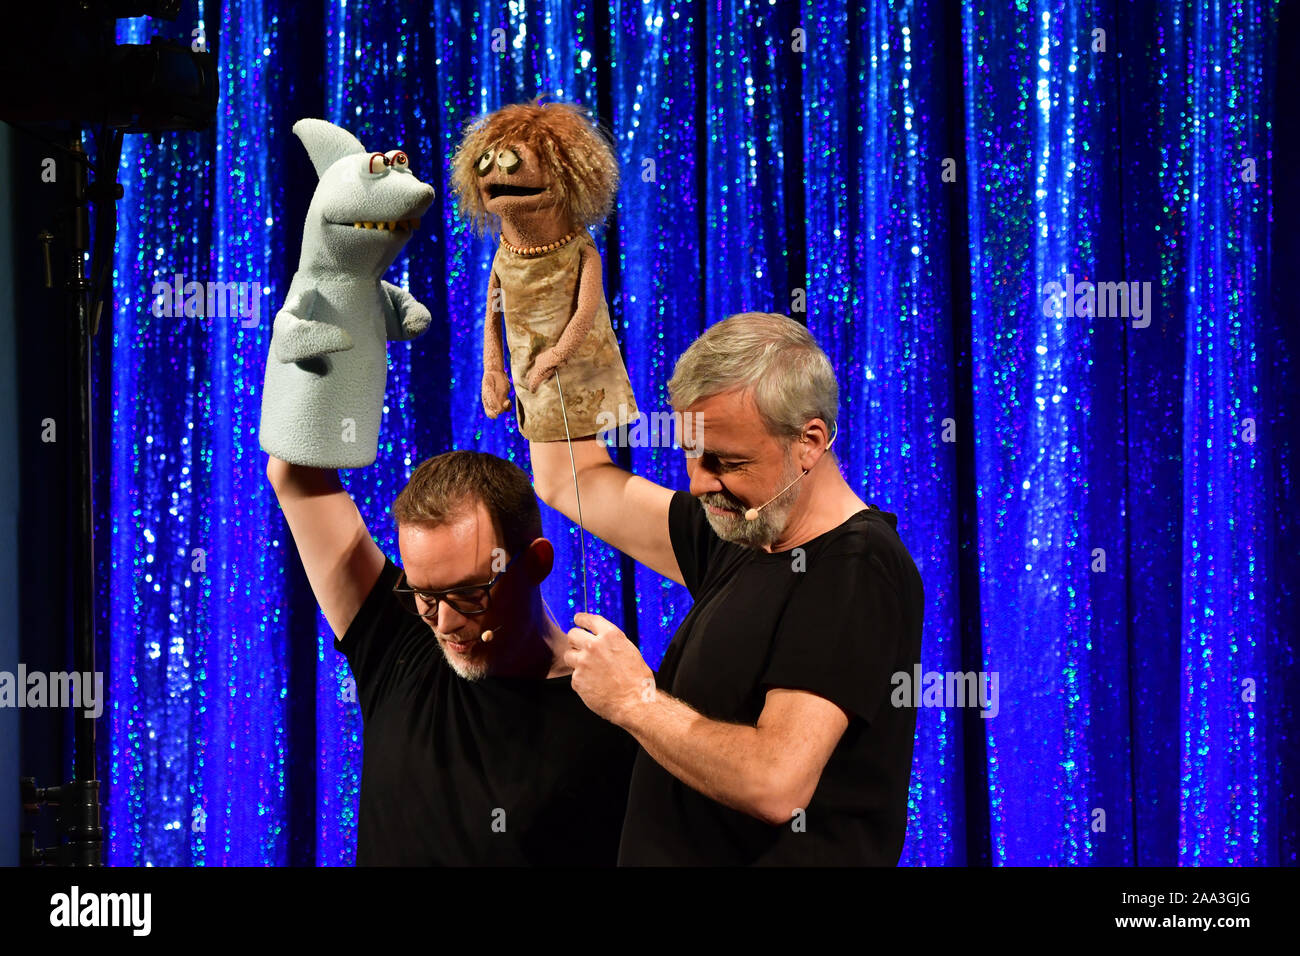 Glauchau, Germany. 16th Nov, 2019. Martin Reinl (left) and Carsten Haffke  (right) during their show "Unter Puppen" with the blue shark and Charming  Traudl Credit: Nico Schimmelpfennig/dpa-Zentralbild/ZB/dpa/Alamy Live News  Stock Photo -